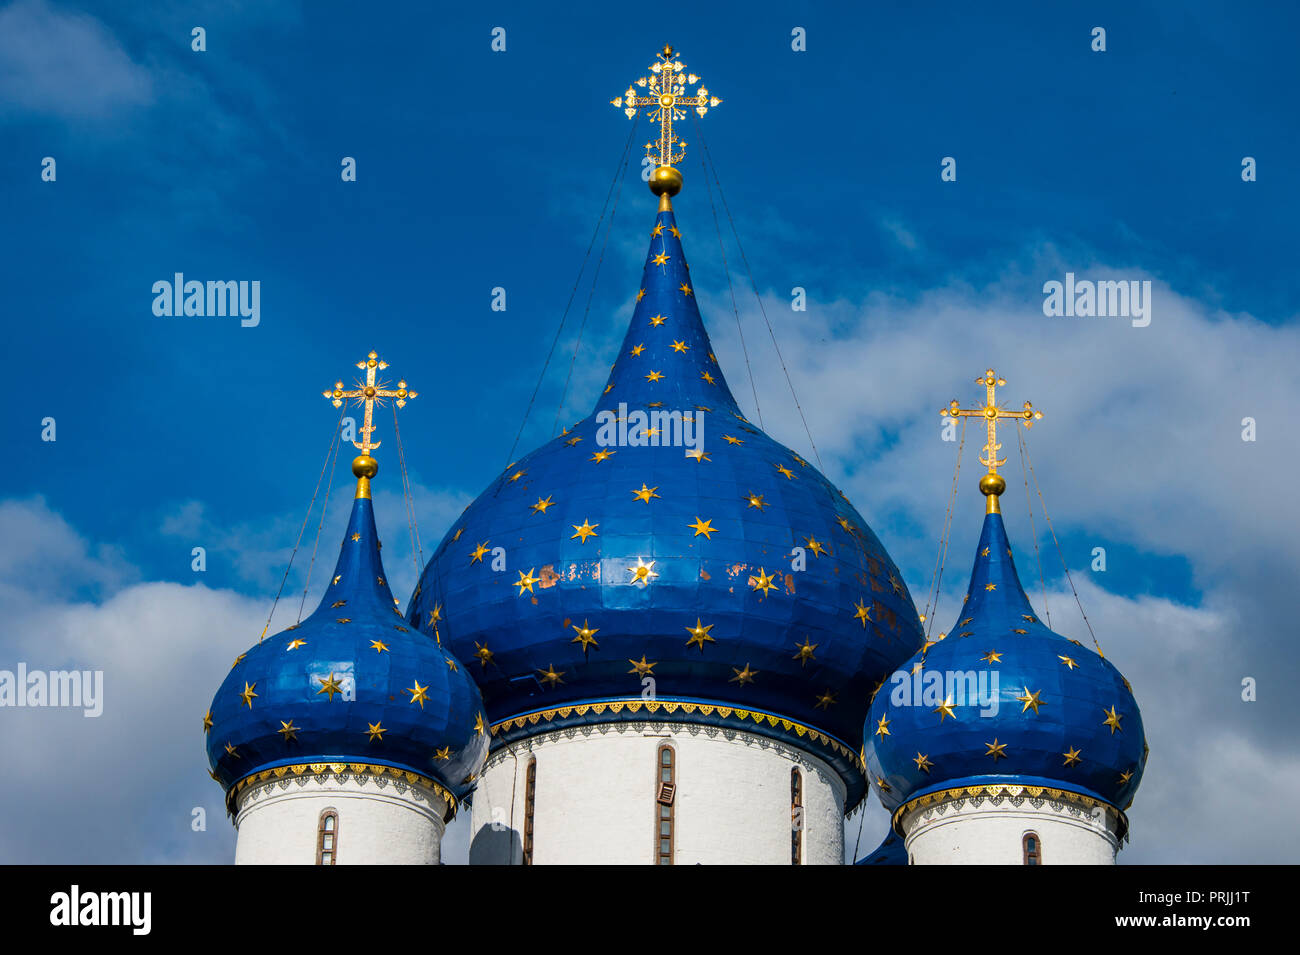 Blue cupolas of the russian orthodox church, Nativity of the virgin cathedral, Unesco world heritage sight, Suzdal, Russia Stock Photo